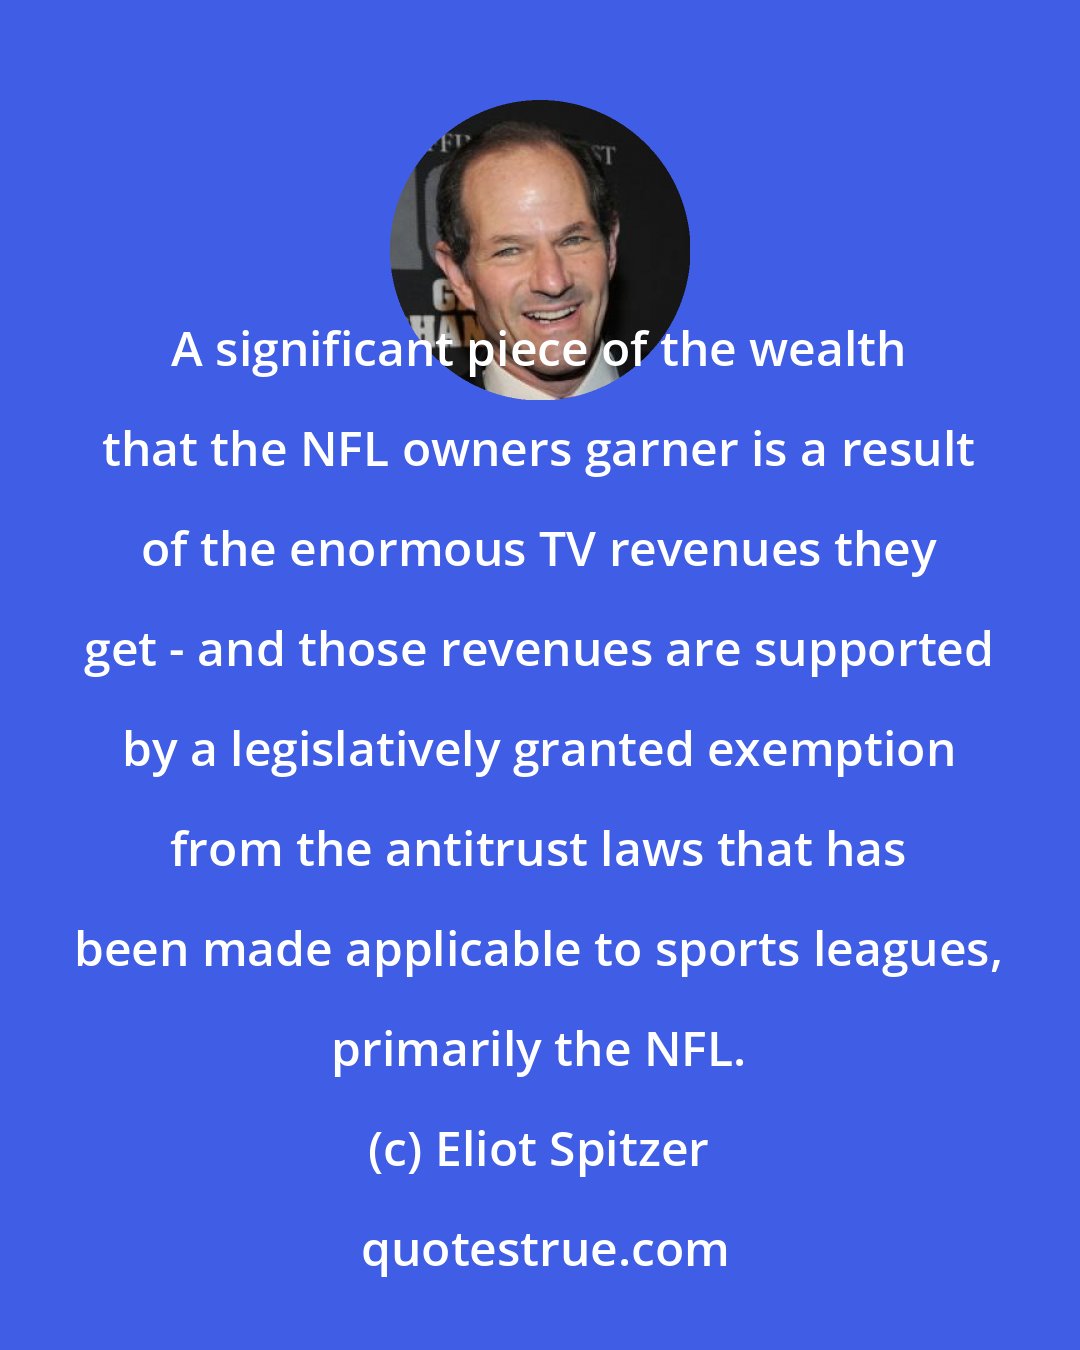 Eliot Spitzer: A significant piece of the wealth that the NFL owners garner is a result of the enormous TV revenues they get - and those revenues are supported by a legislatively granted exemption from the antitrust laws that has been made applicable to sports leagues, primarily the NFL.